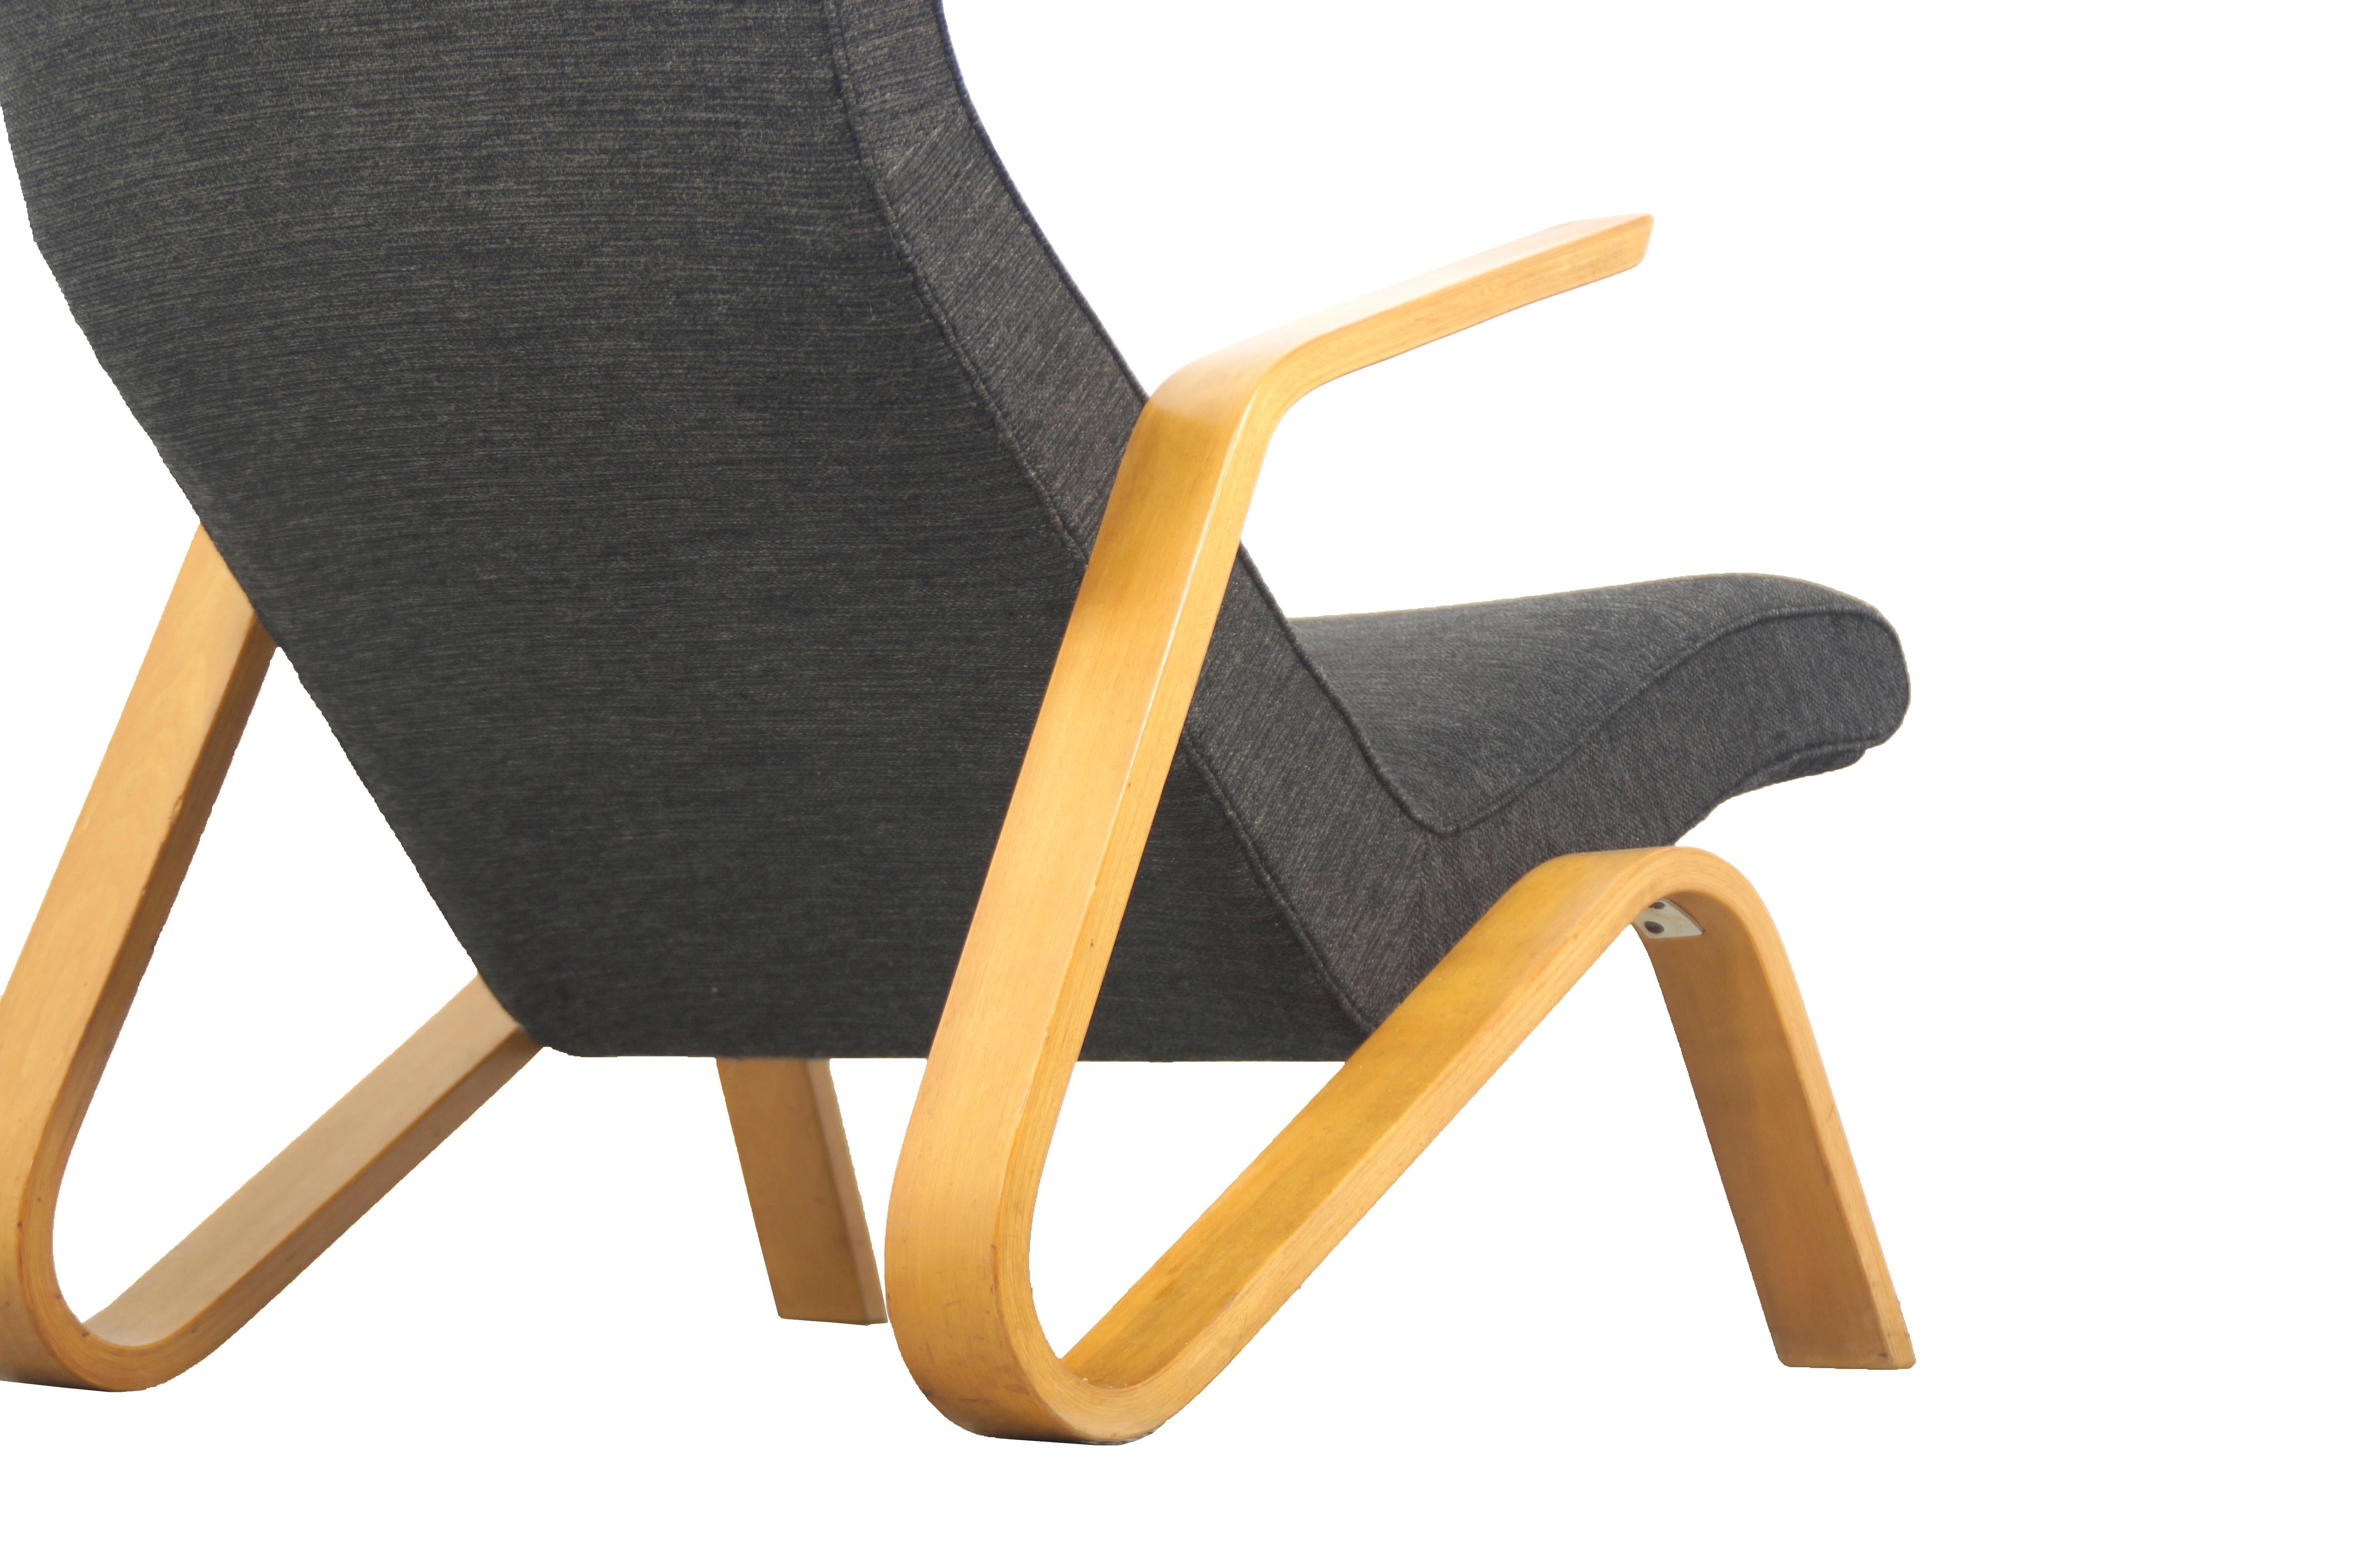 Grasshopper Lounge Chair designed by Eero Saarinen for Knoll International In Good Condition For Sale In Offenburg, Baden Wurthemberg